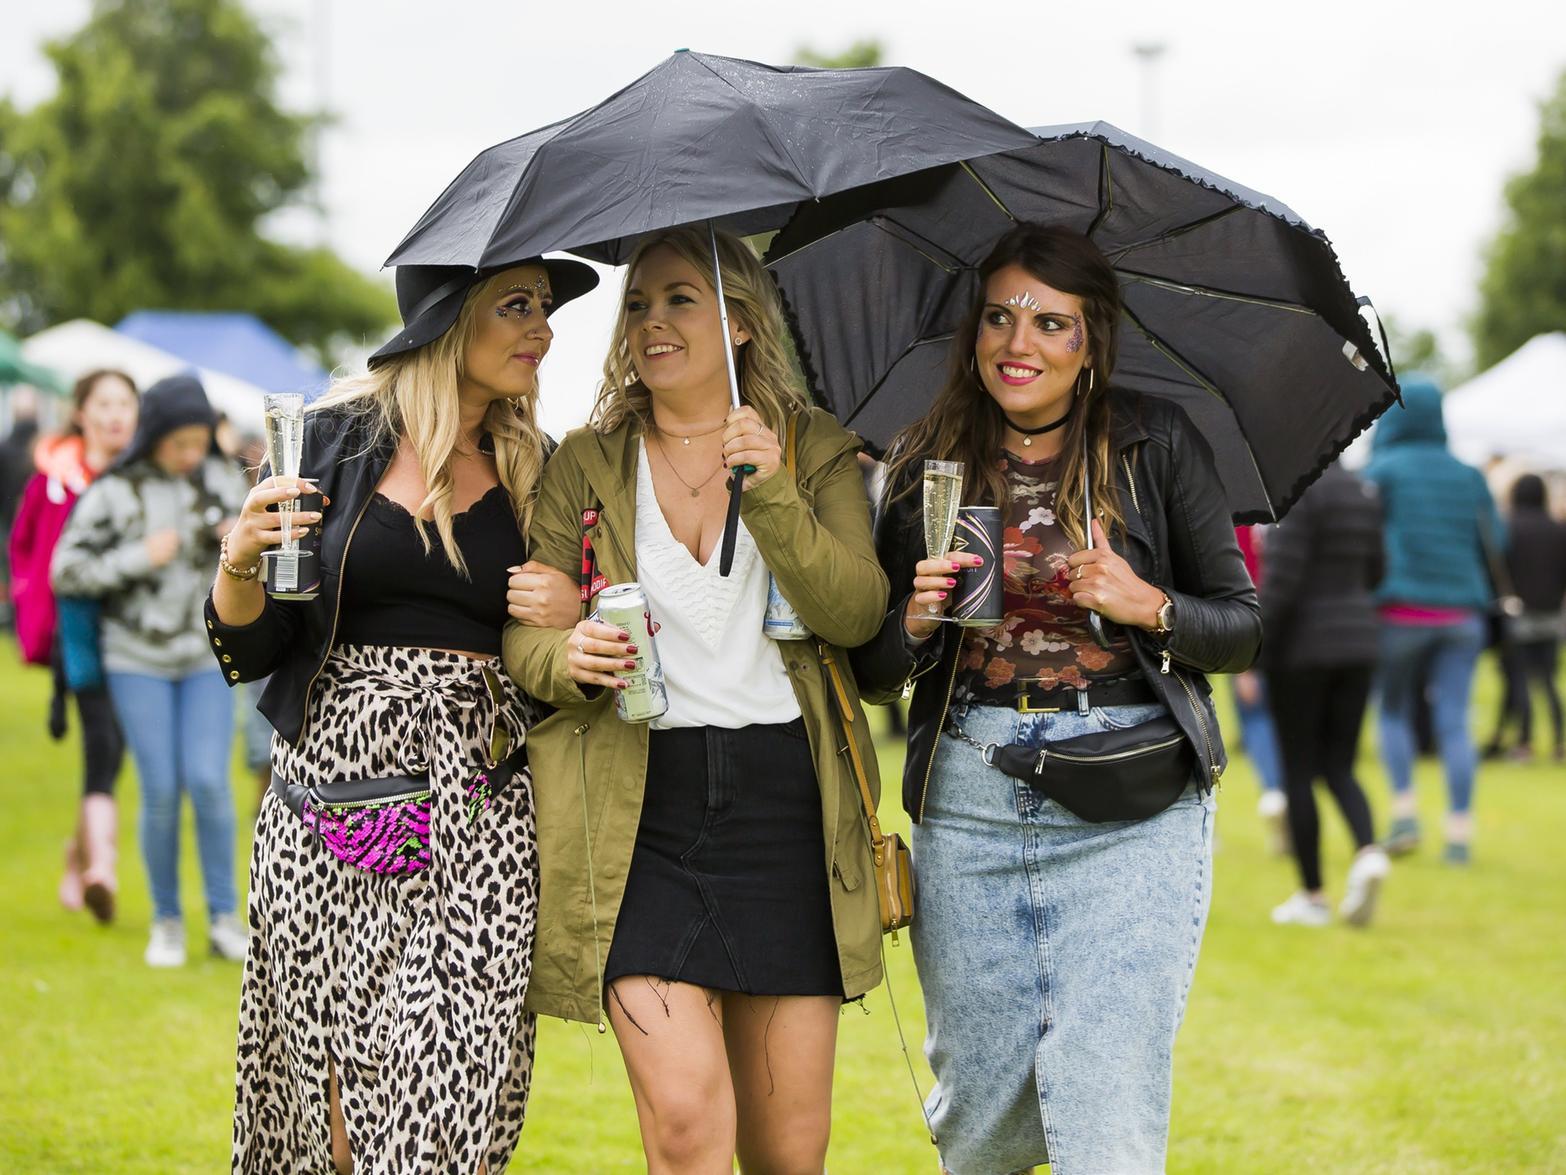 Brodstock Music Festival, which takes place every year at Hipperholmes Old Brodleians Rugby Union Football Club, will return on June 2020. Tickets for the event are usually a sell out so make sure youre on the ball if you want to attend.